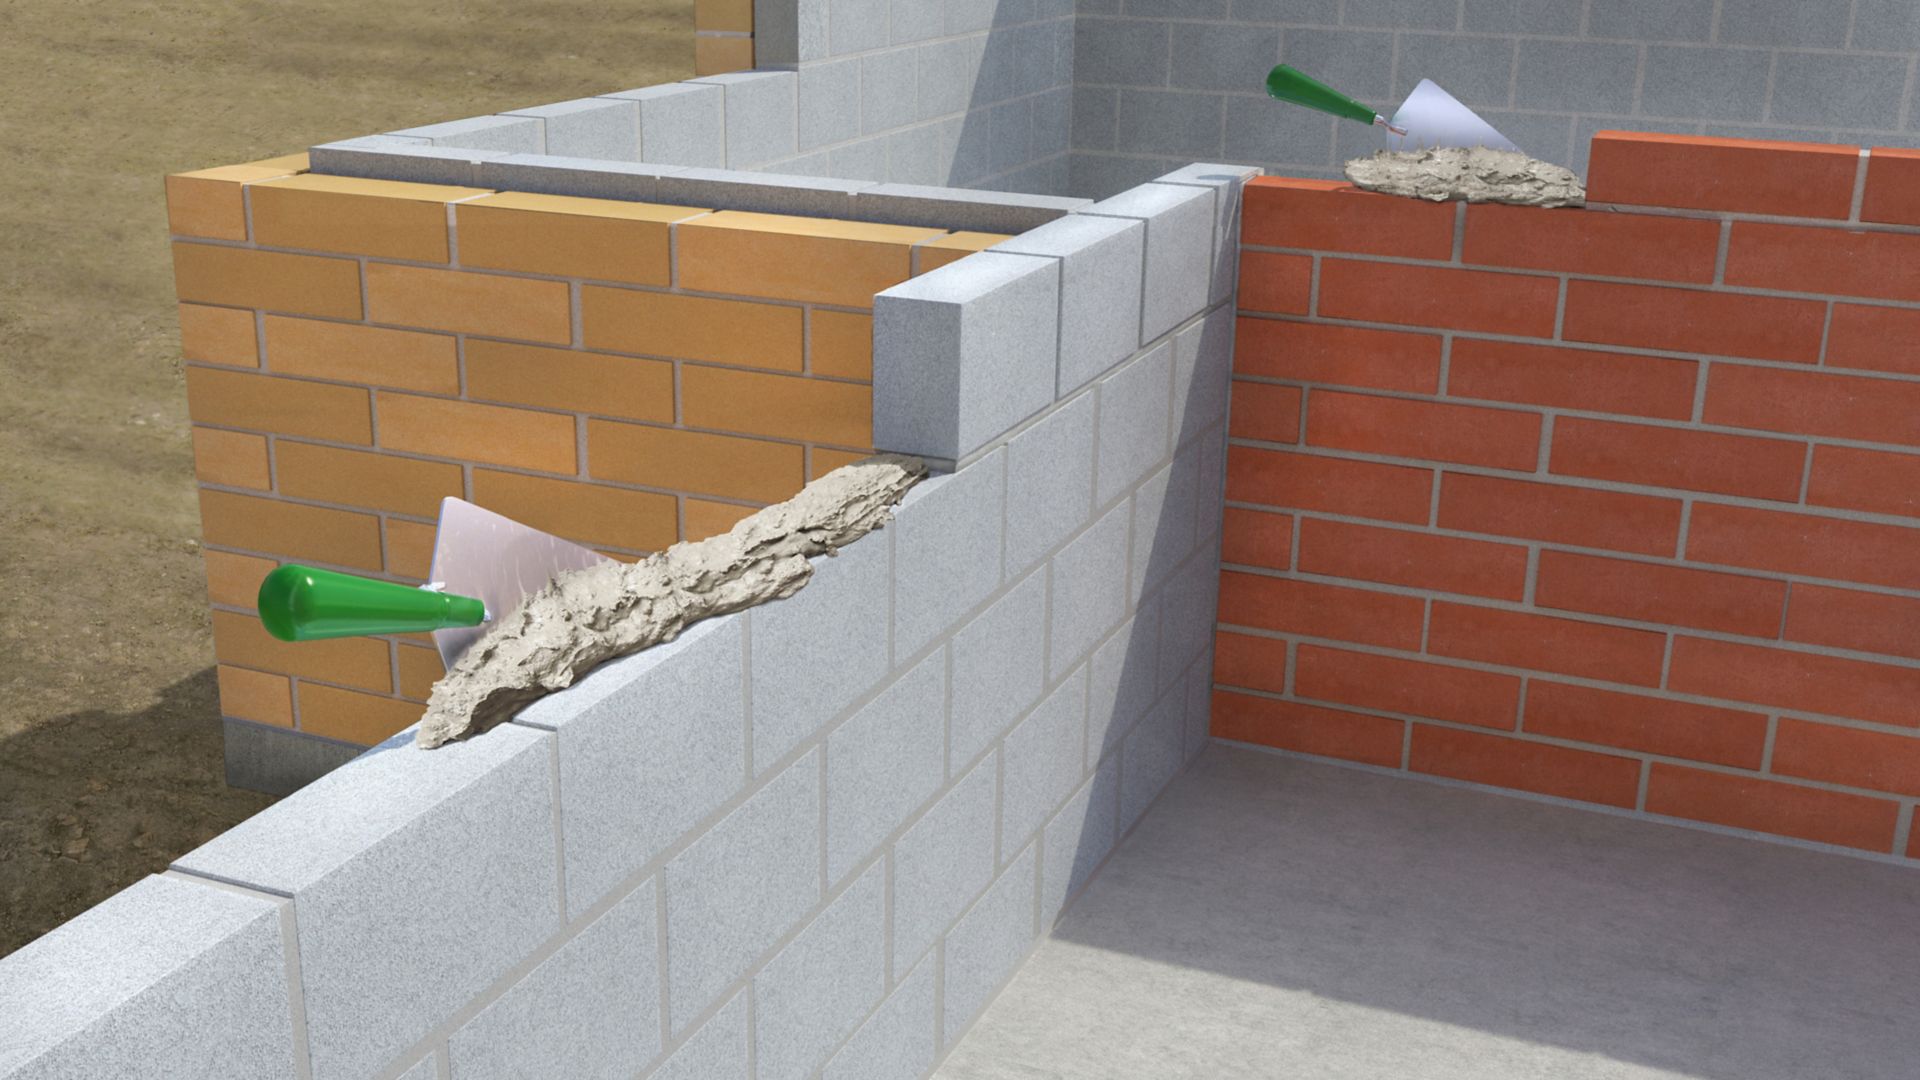 Illustration of Sika MonoTop® bedding mortar for laying concrete block or brick walls with trowel